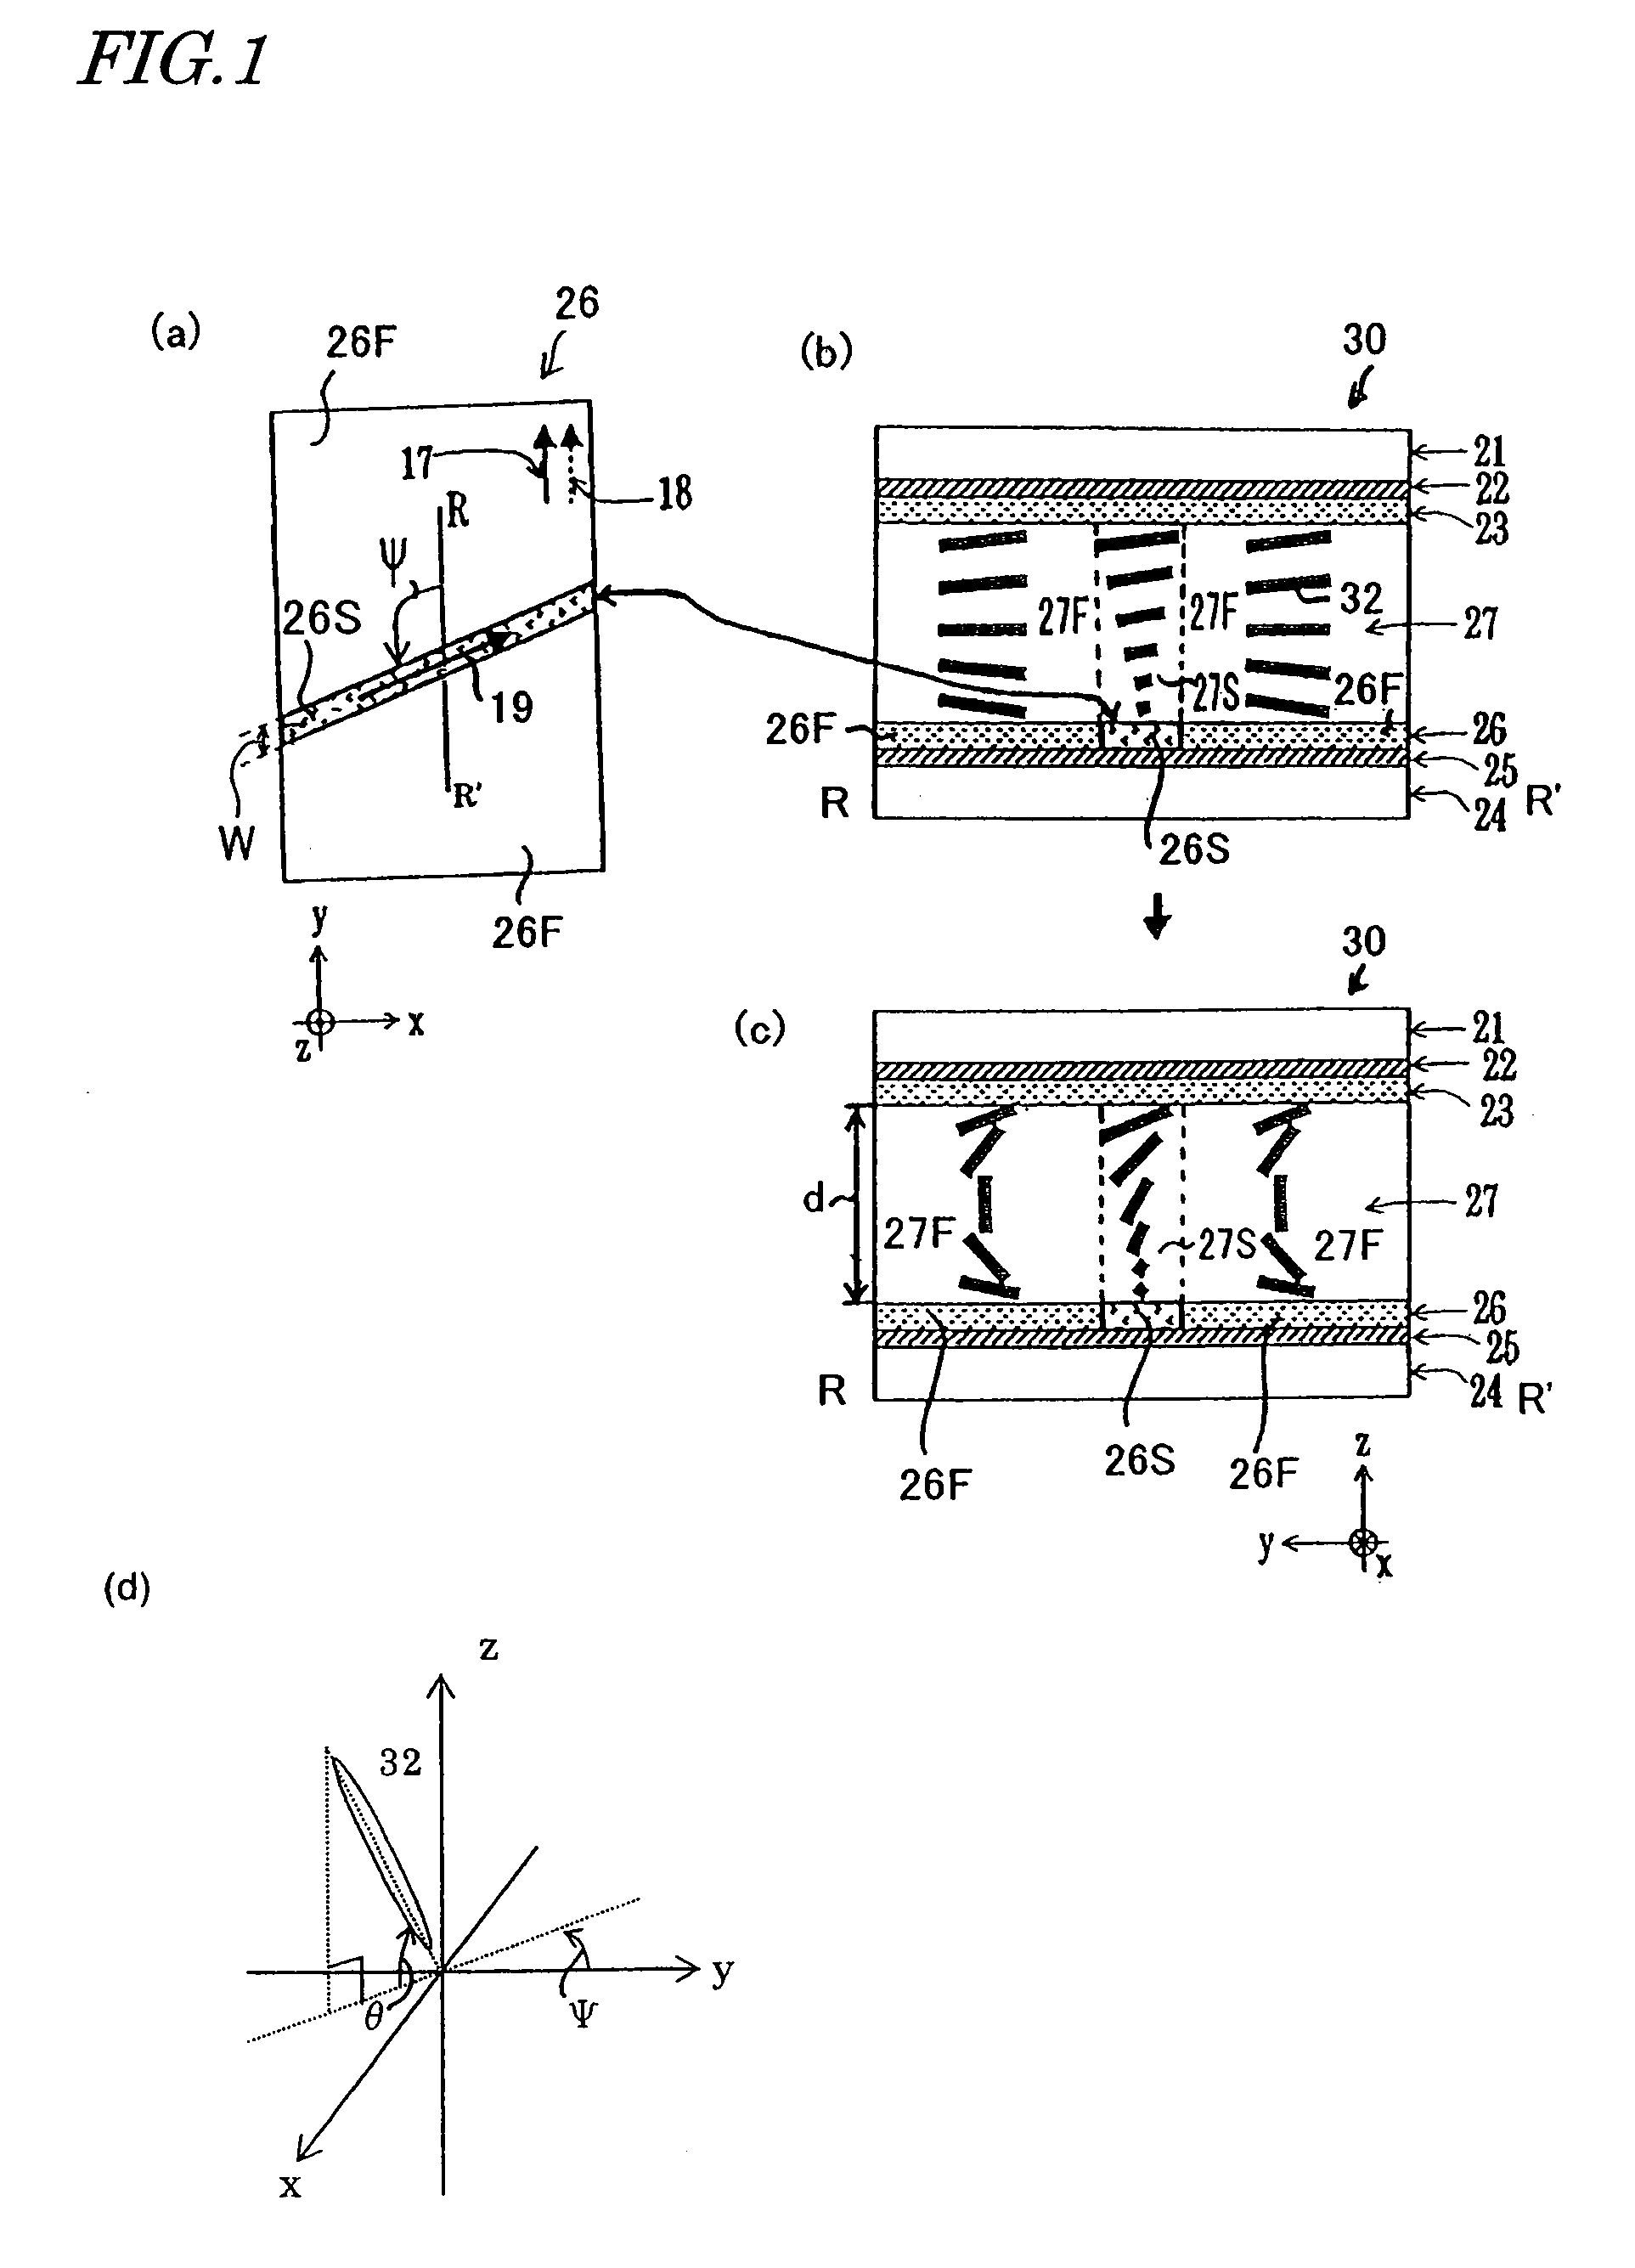 Liquid crystal display device comprising a TN alignment region continuously connectable with a bend alignment region, each region having a different pretilt direction and the method of fabricating the same